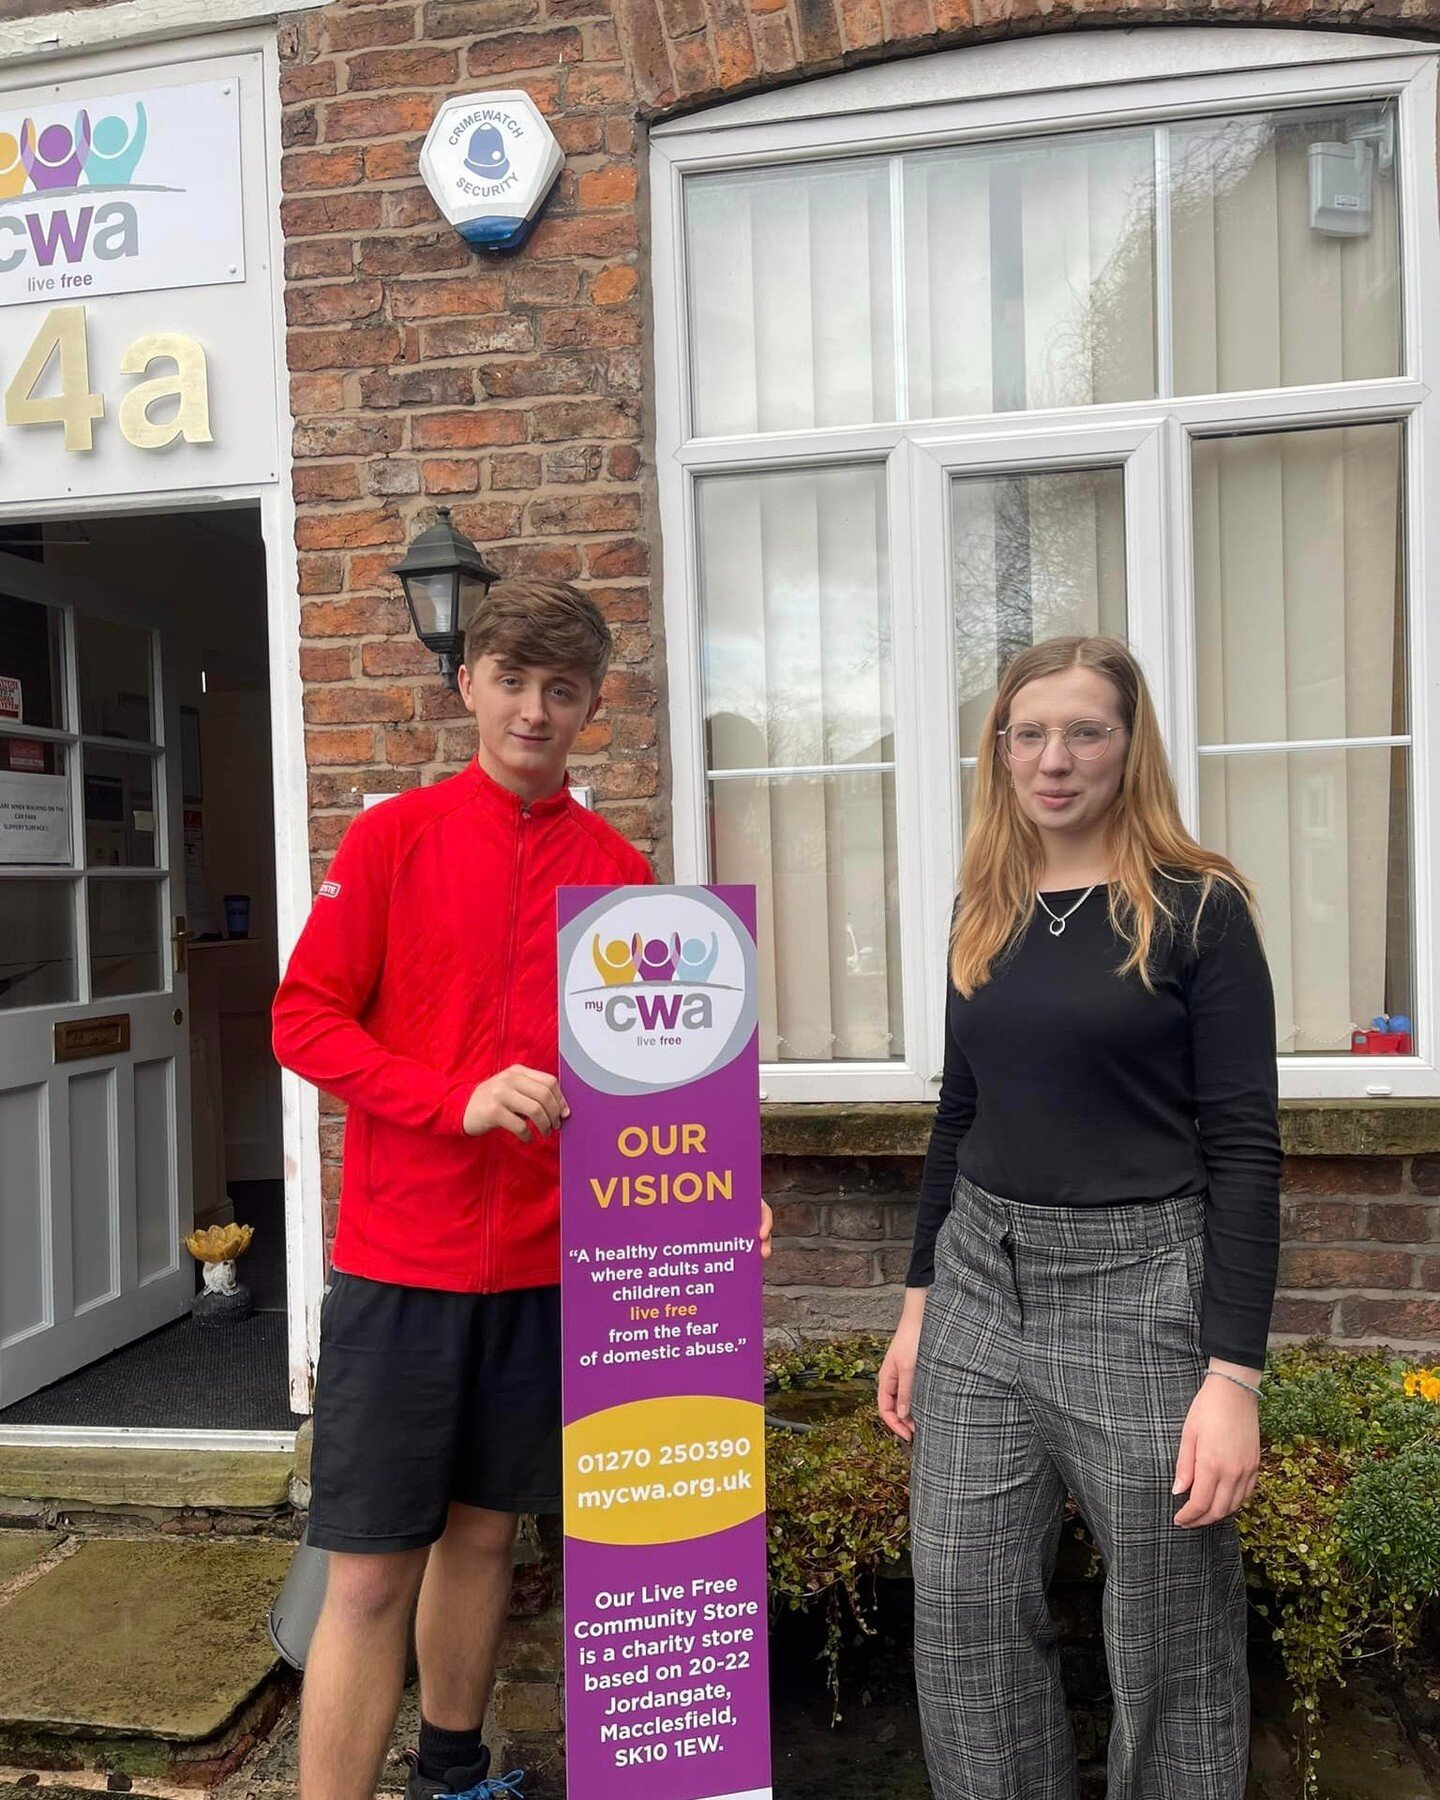 🌟 WOW! 🌟

We were so incredibly touched by the generosity of fundraising super-star, @henryoscarmoores, who popped into our Macclesfield Community Store this week to make a &pound;750 donation.

Henry is raising money for Macclesfield charities thr